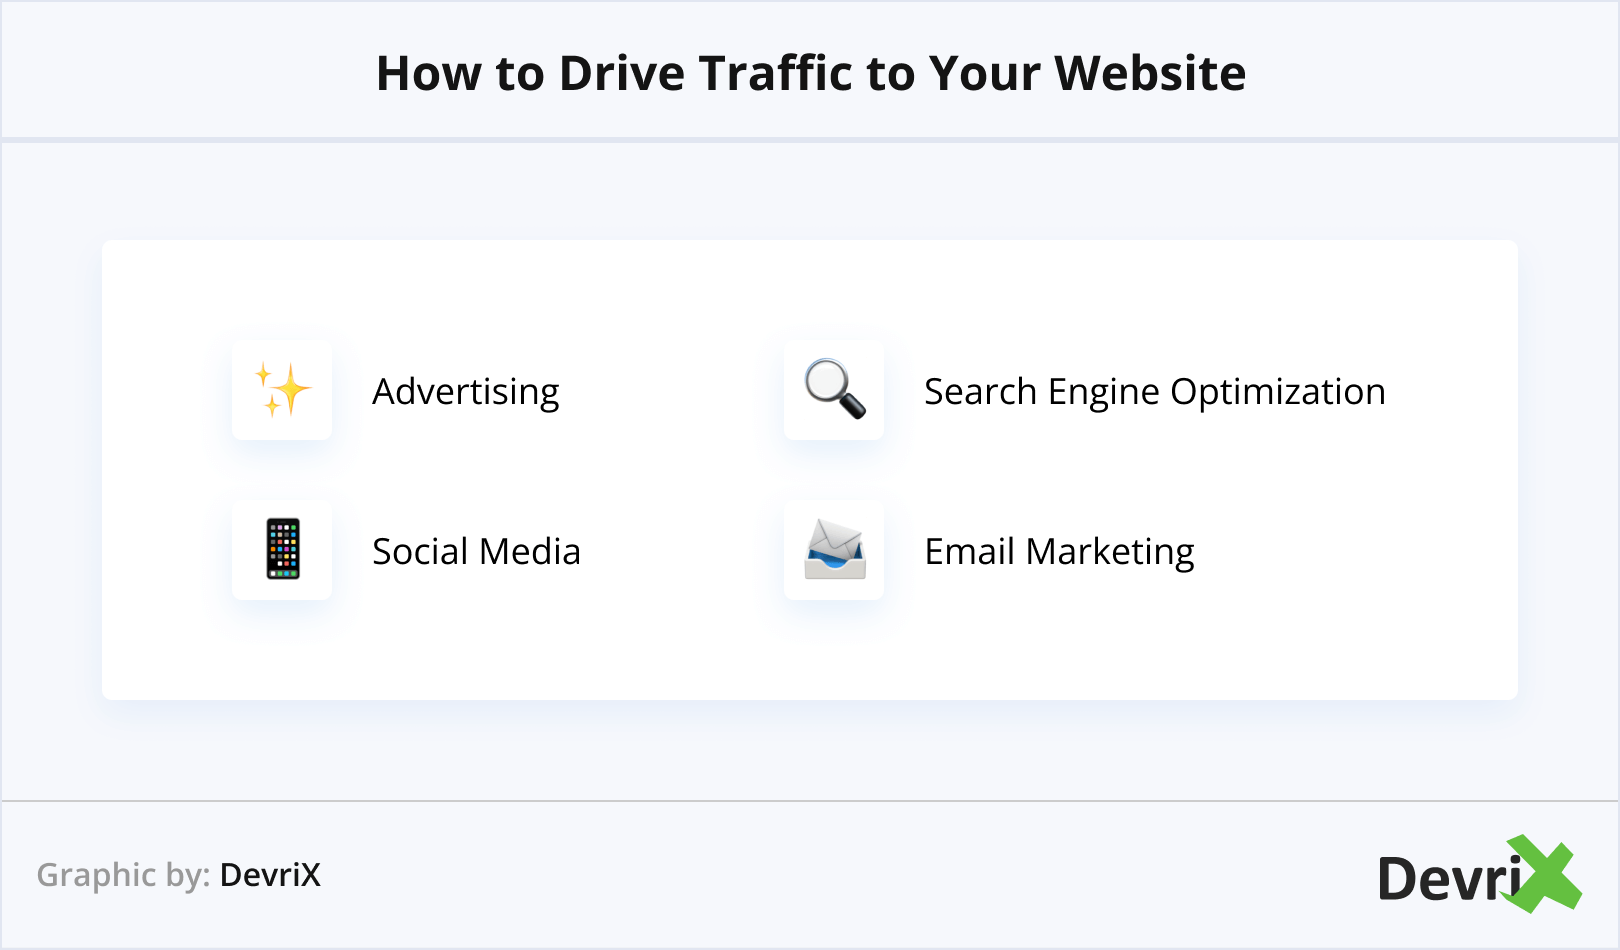 How to Drive Traffic to Your Website: The Main Paths